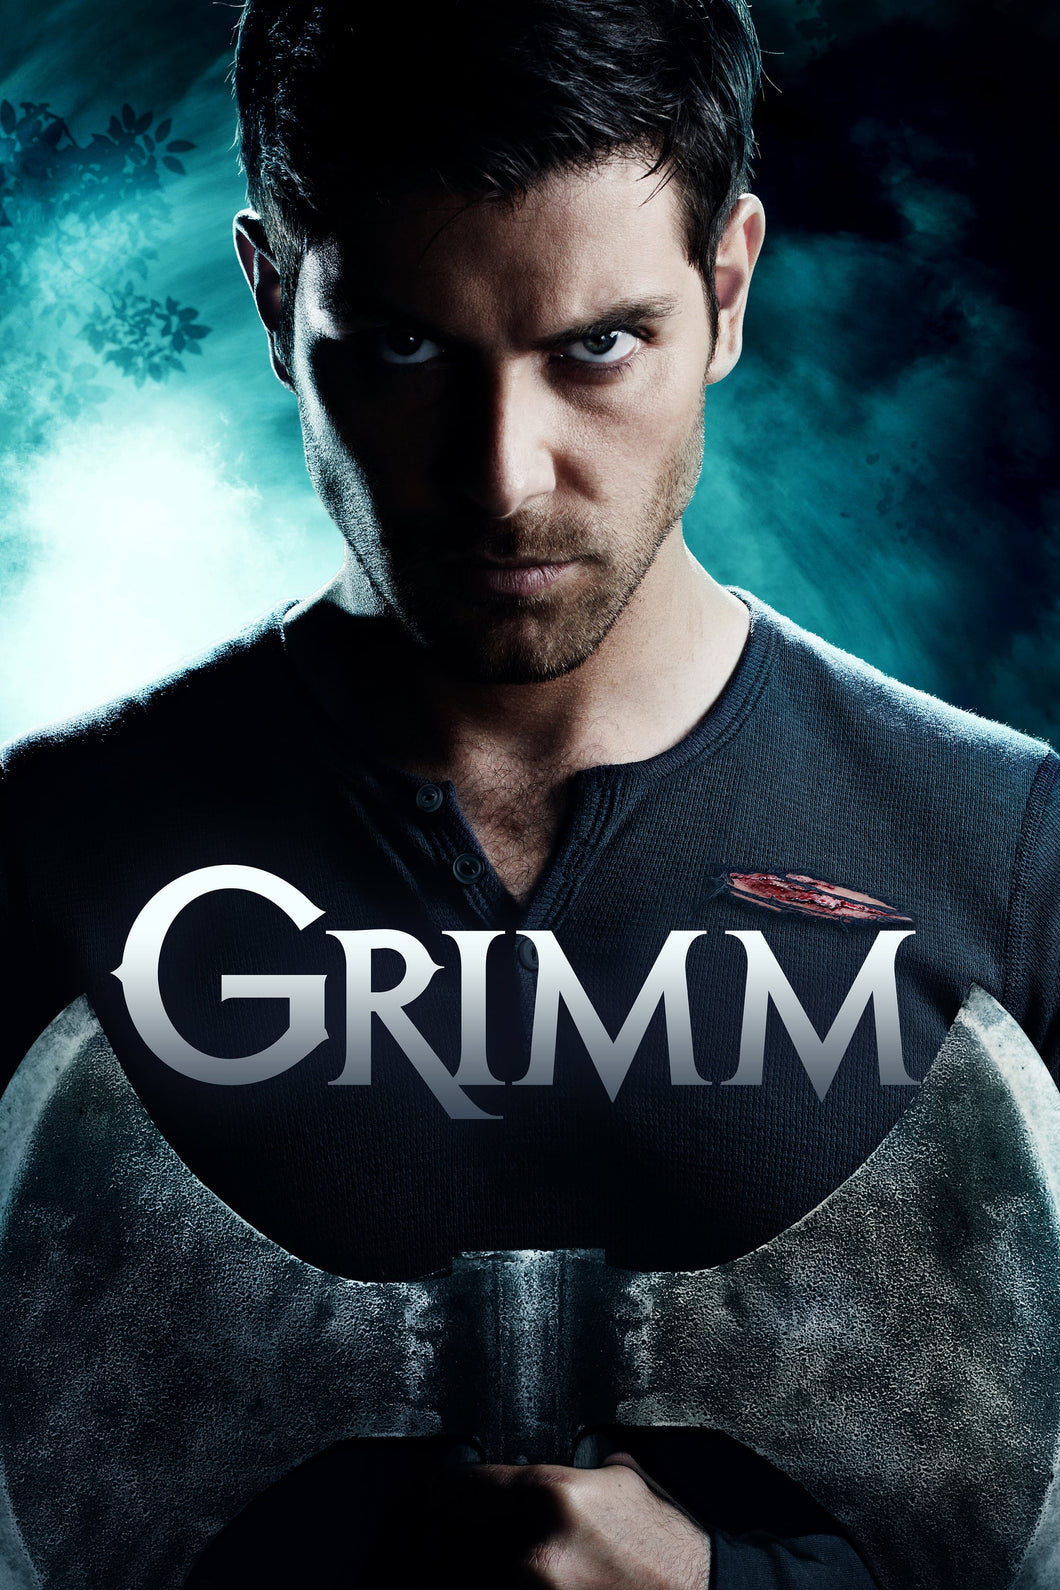 Grimm (2011)v3 TV Series High Quality Glossy Paper A1 A2 A3 A4 A3 Framed or Unframed!!!